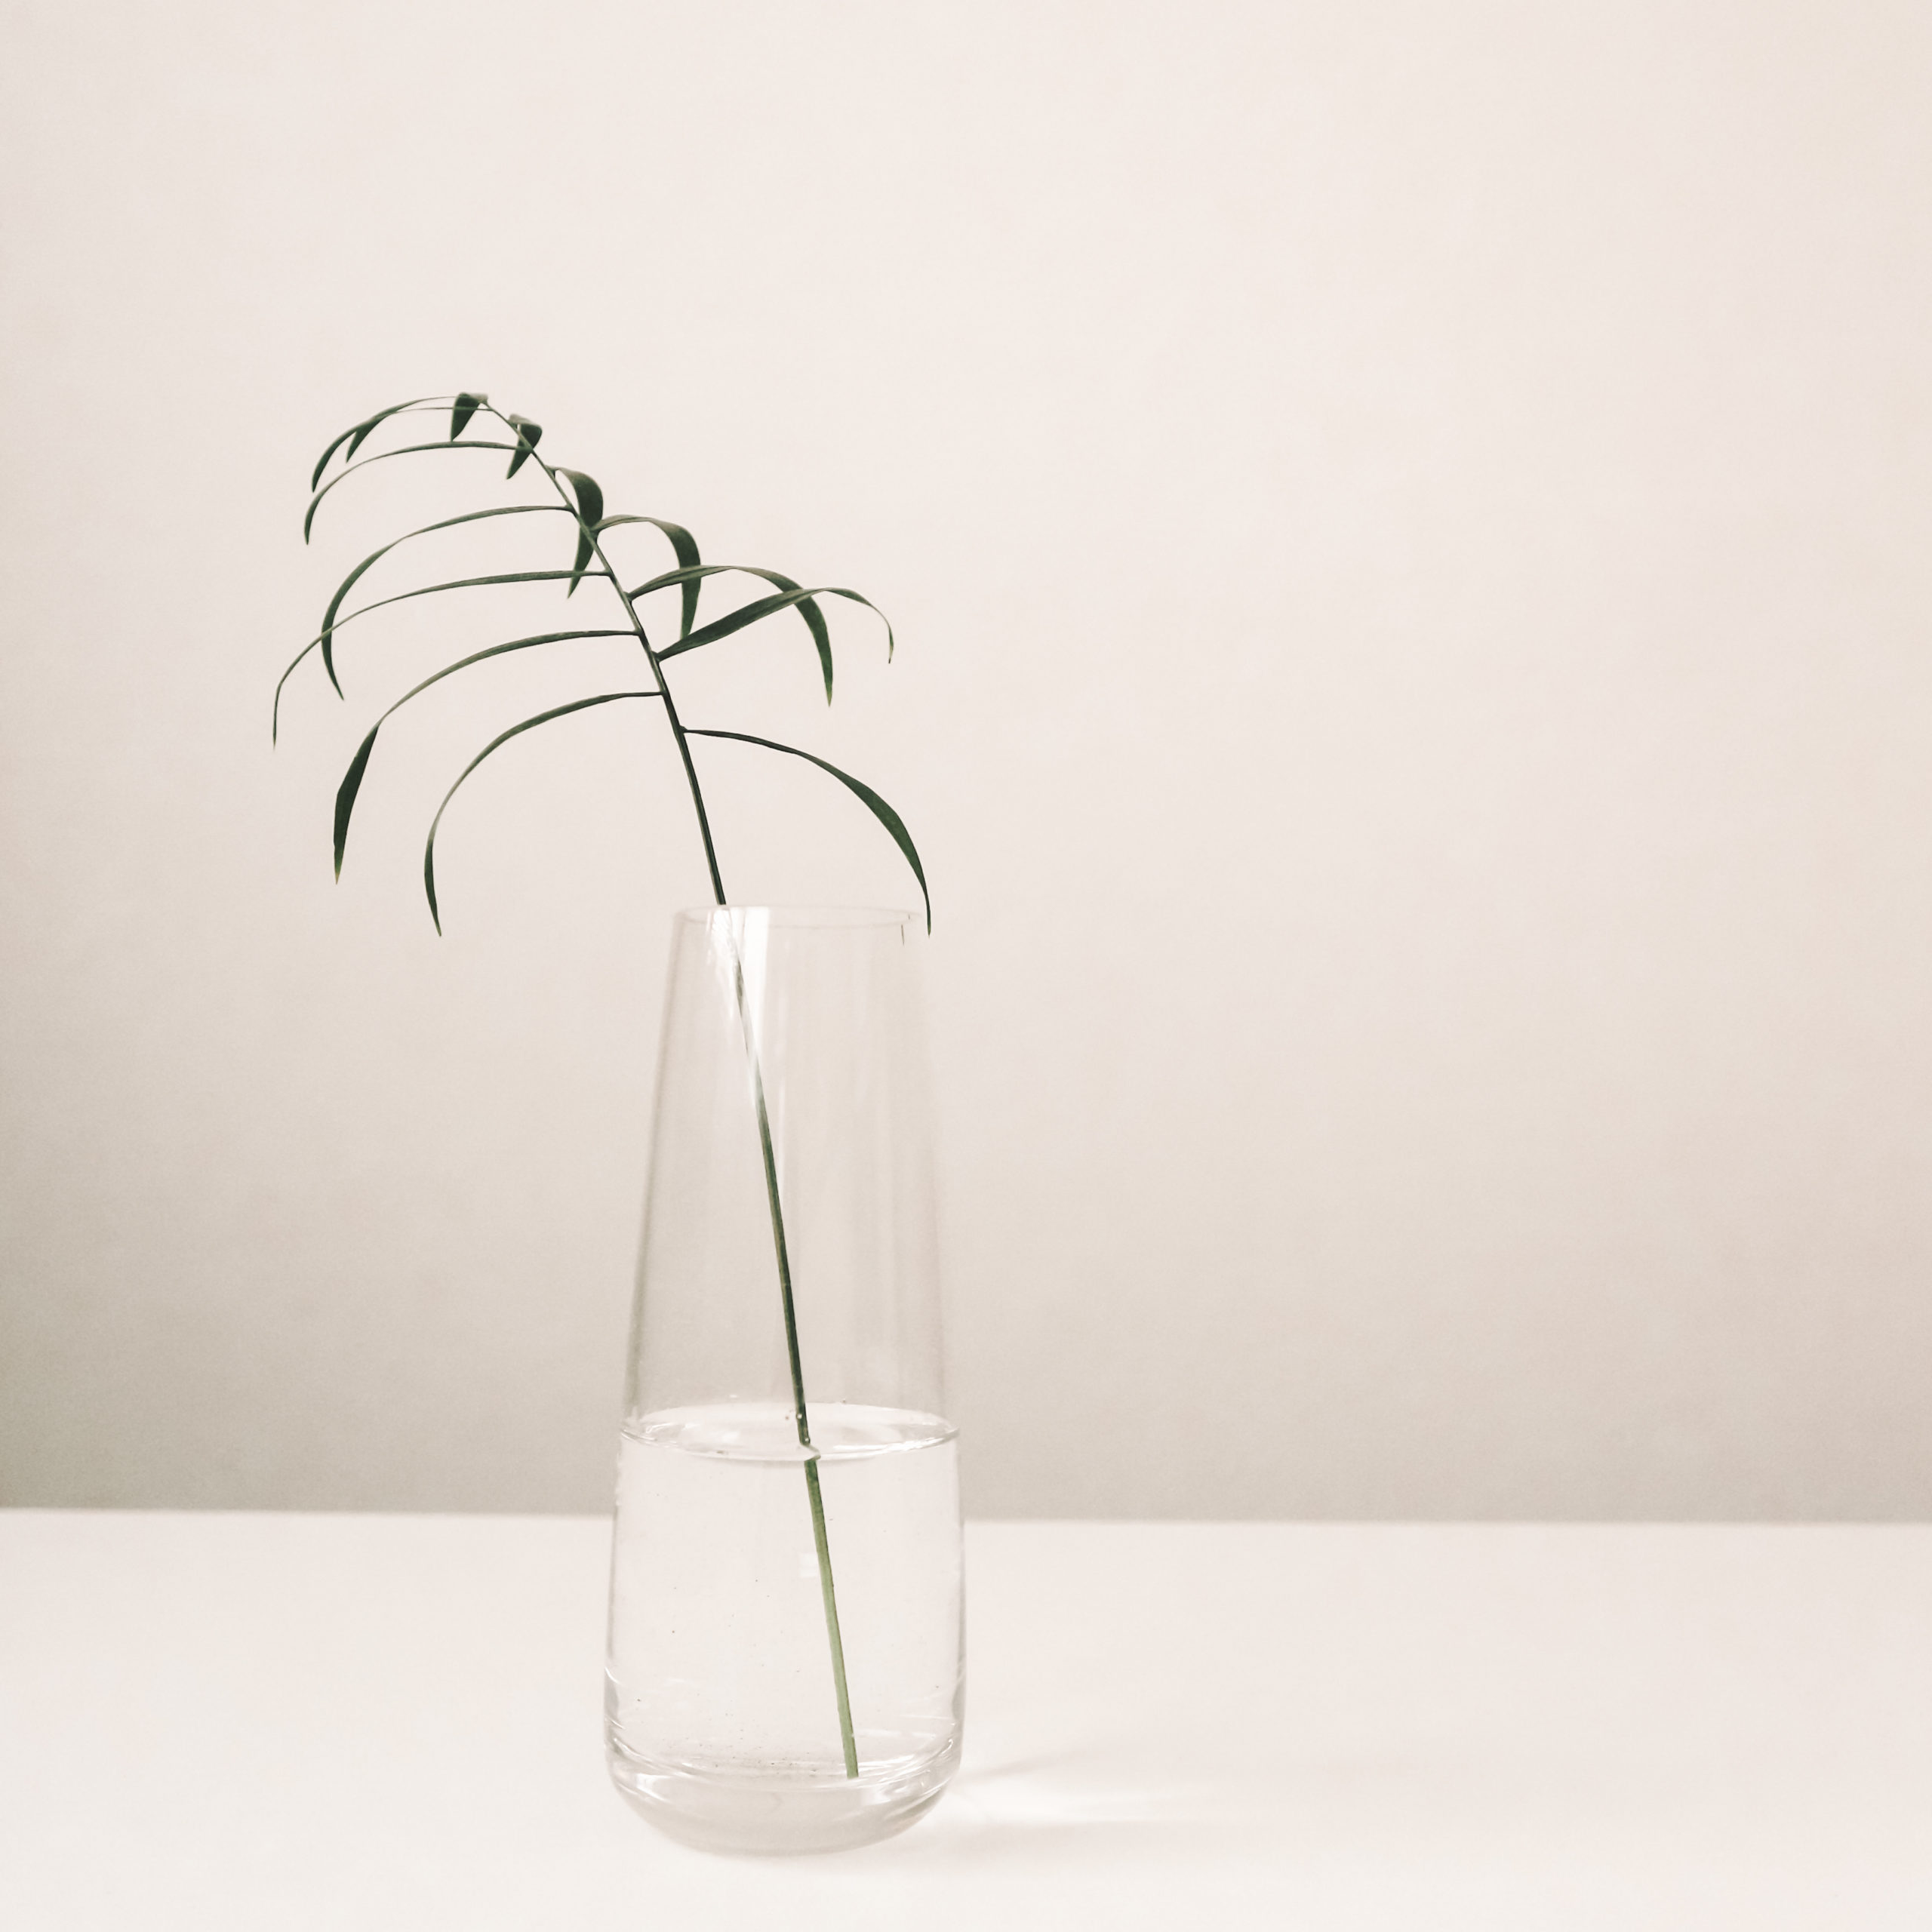 Vase with water and a plant leaf.